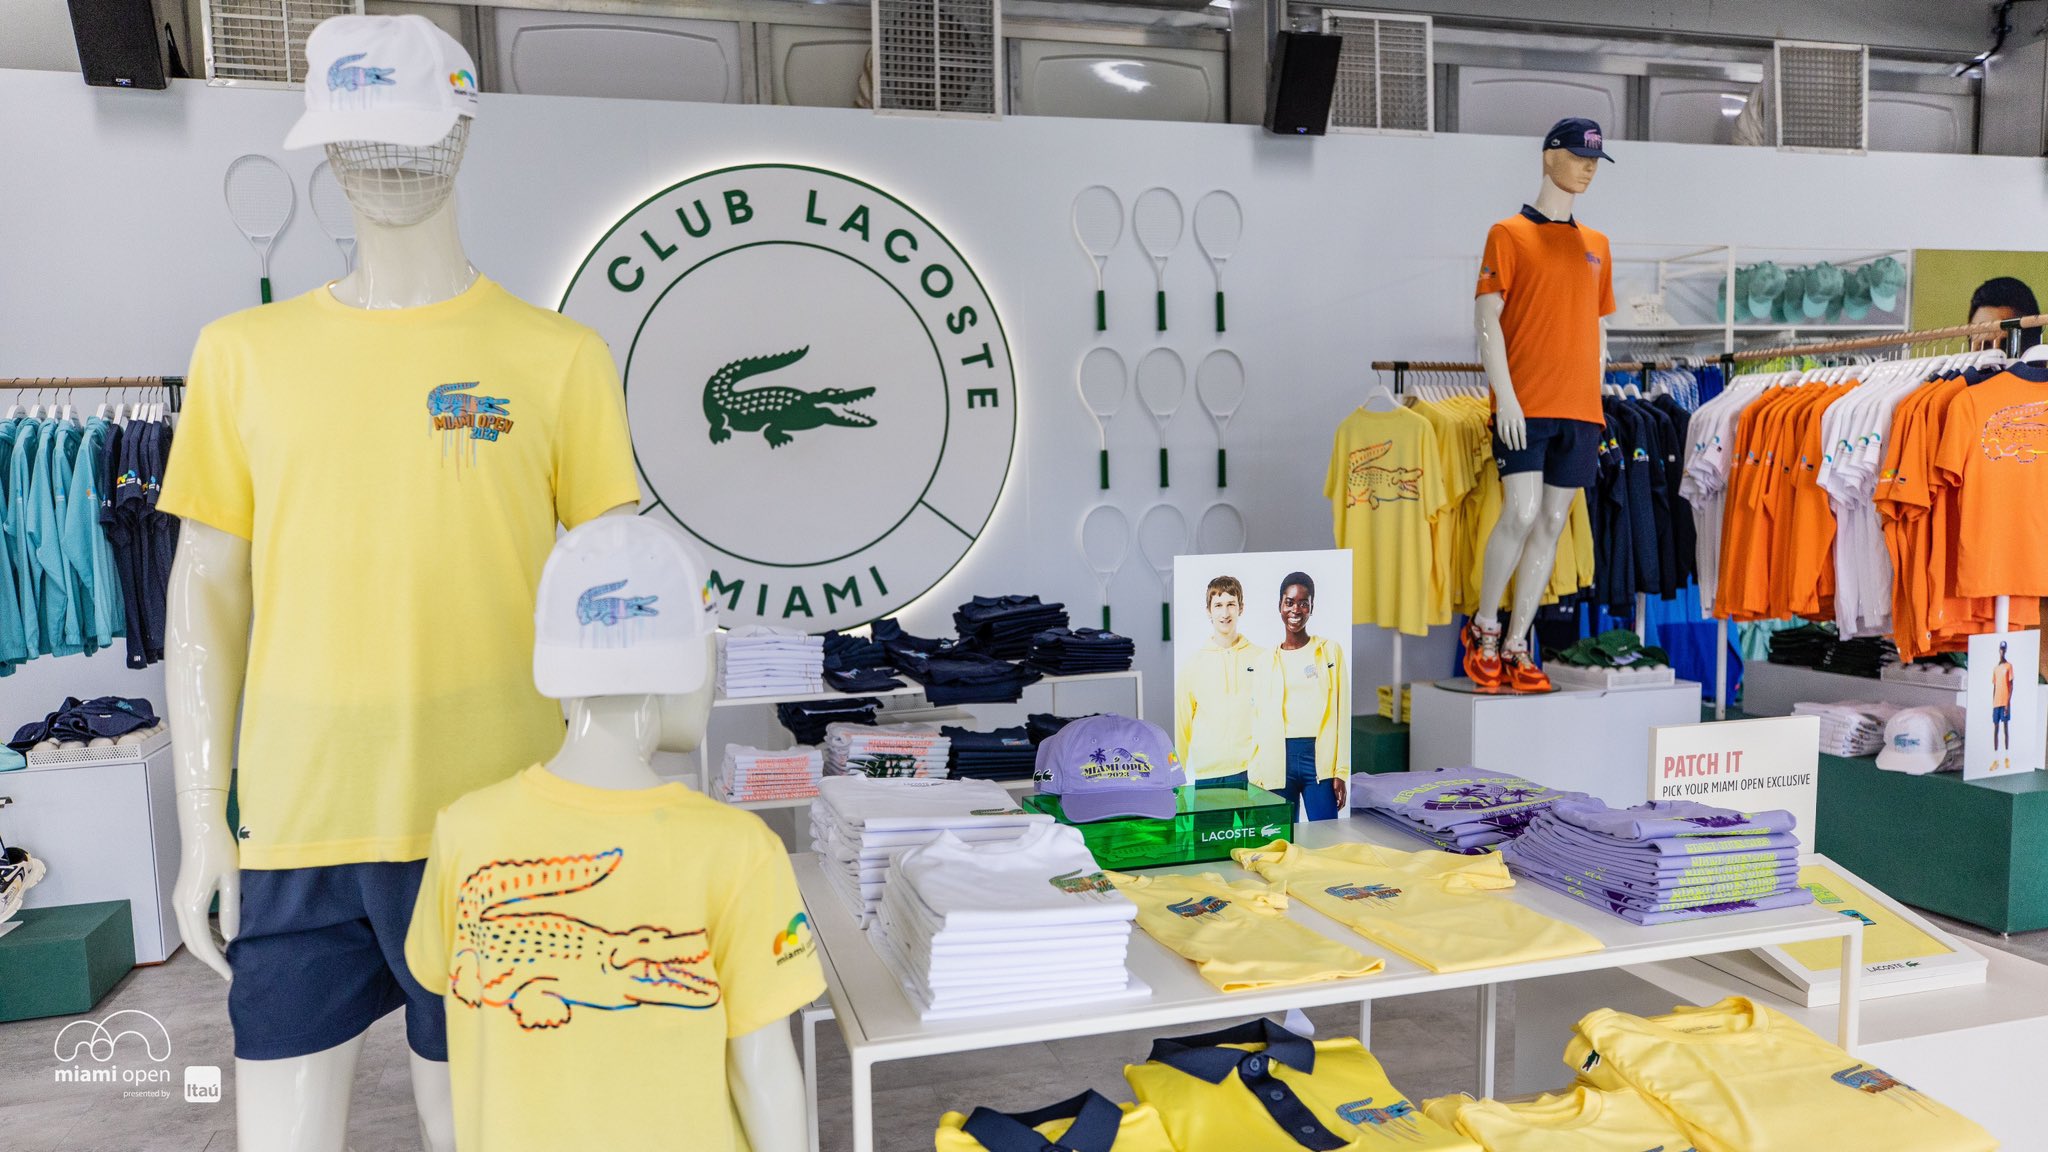 Miami Open on Twitter: coming in hot this year with the latest merch from @Lacoste. up your gear from the Lacoste store now! https://t.co/59c5j7lBZv" / Twitter